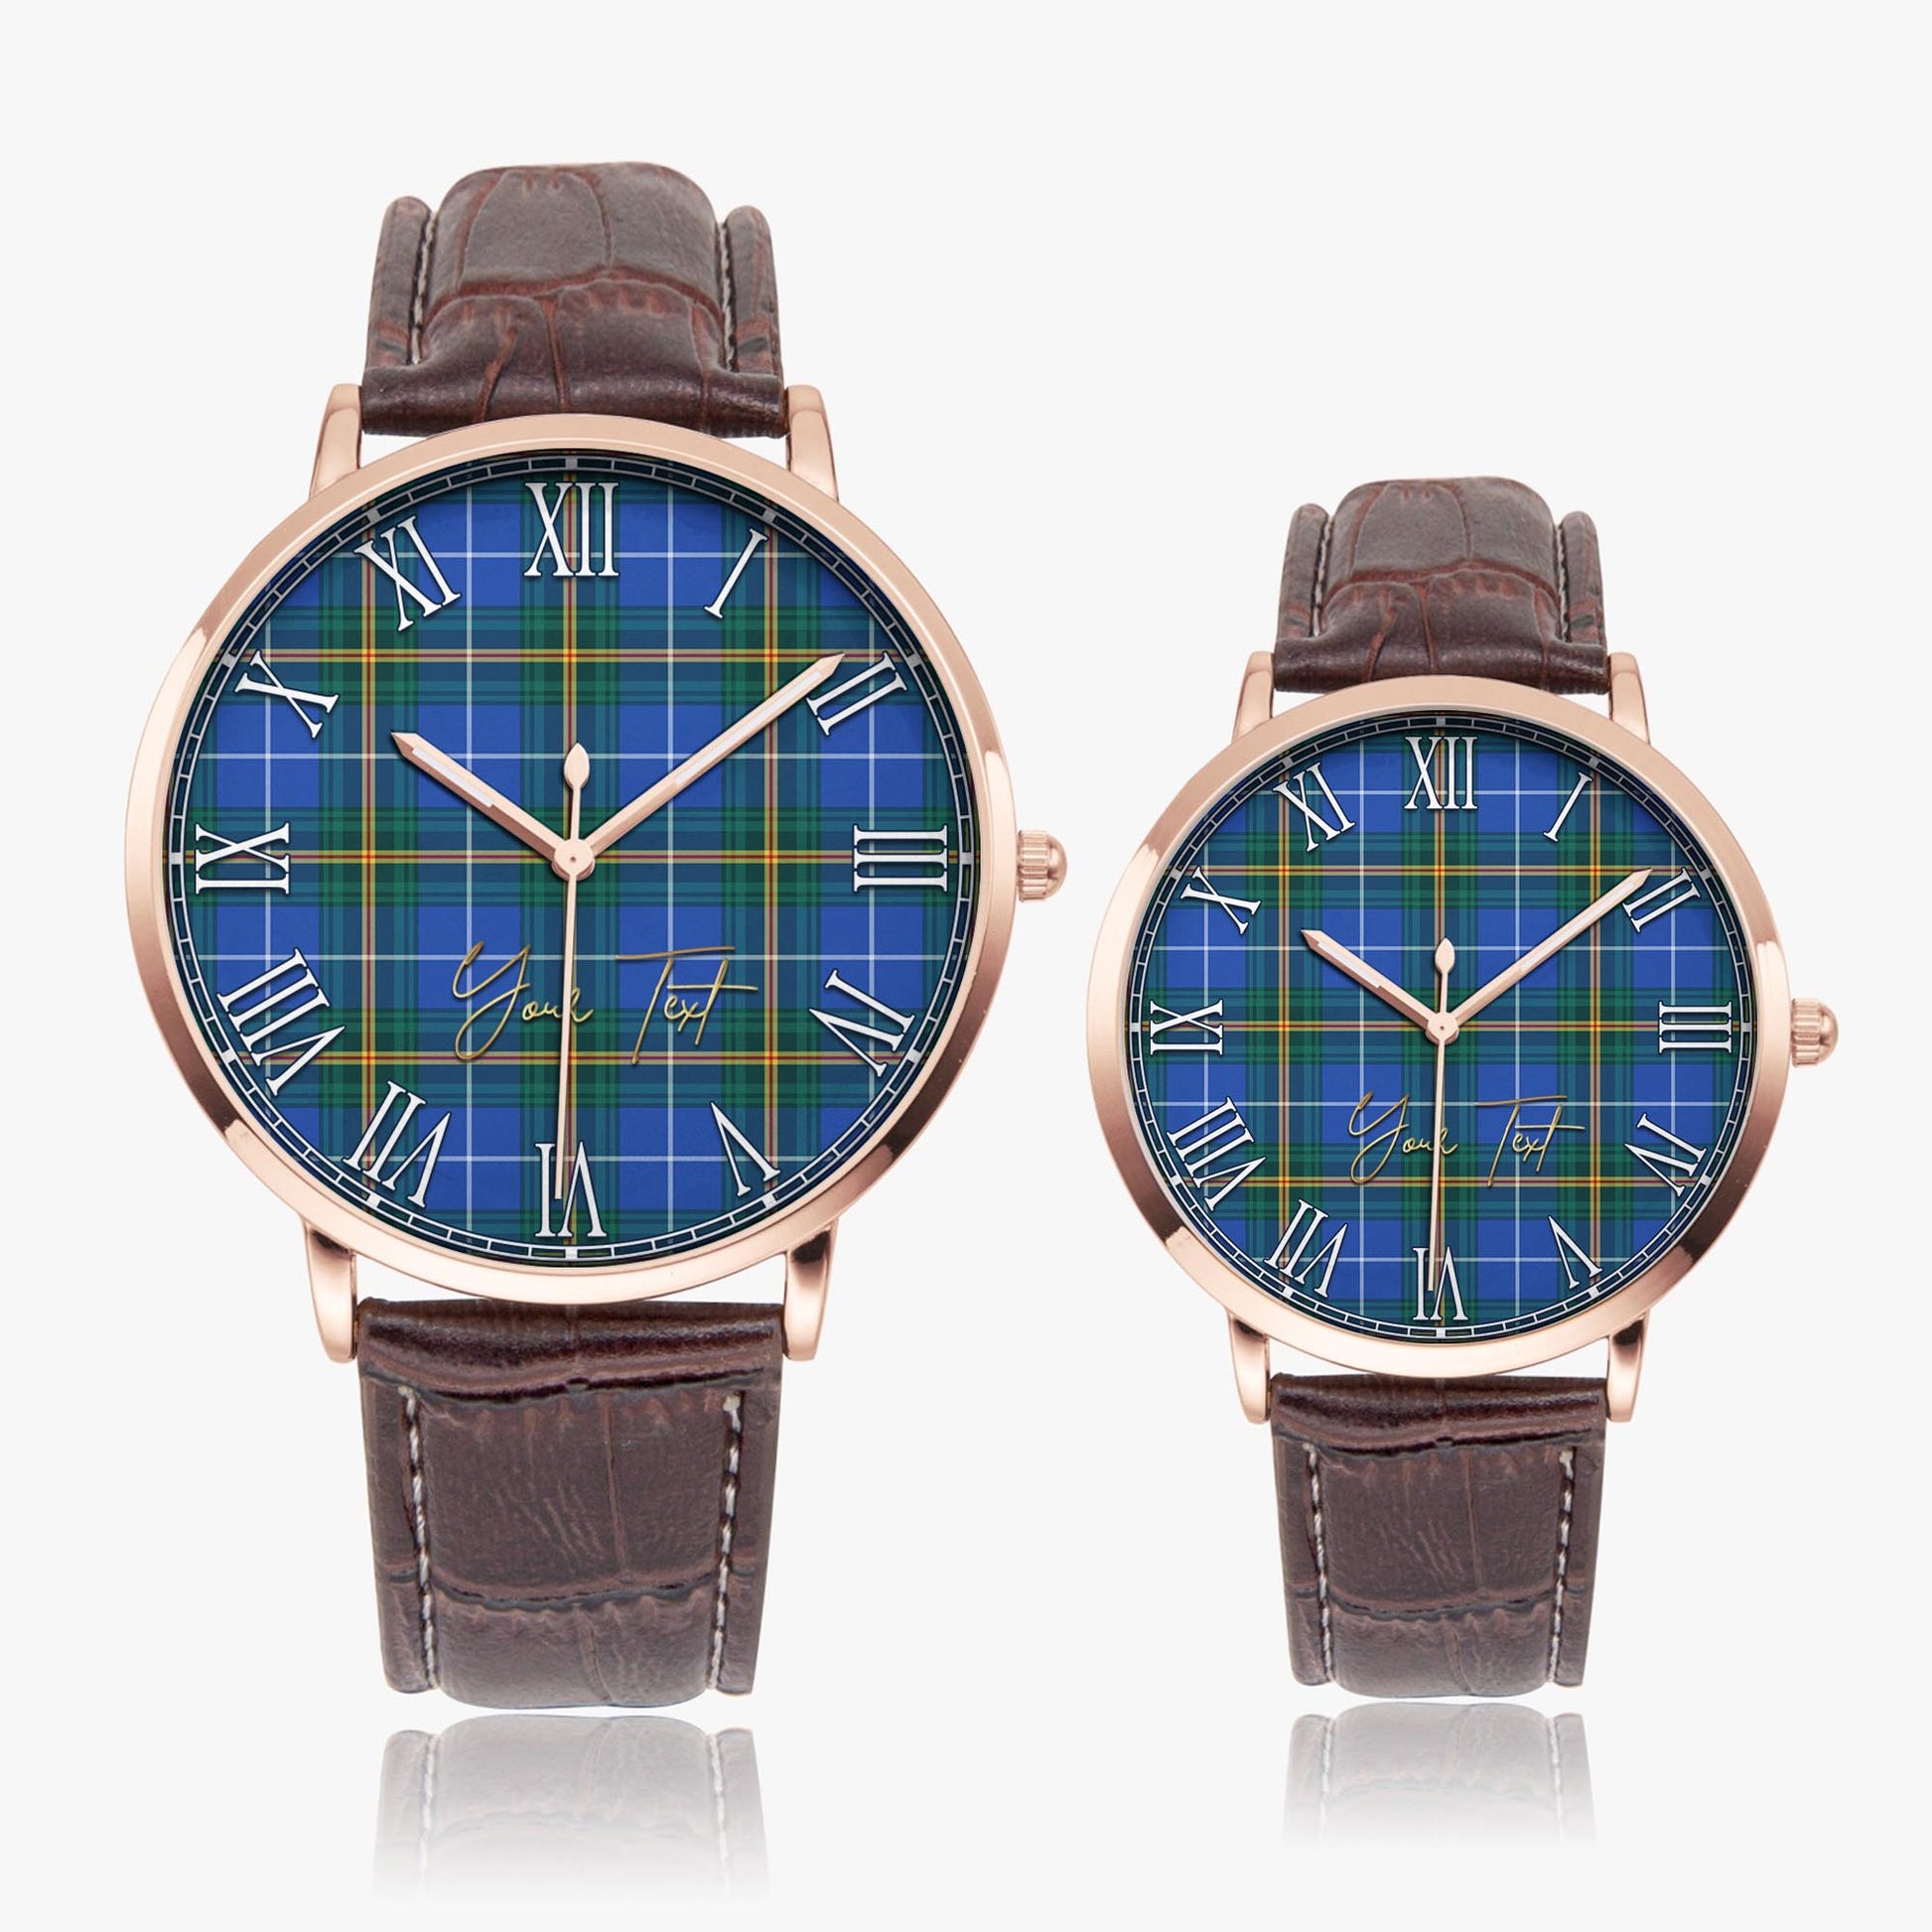 Nova Scotia Province Canada Tartan Personalized Your Text Leather Trap Quartz Watch Ultra Thin Rose Gold Case With Brown Leather Strap - Tartanvibesclothing